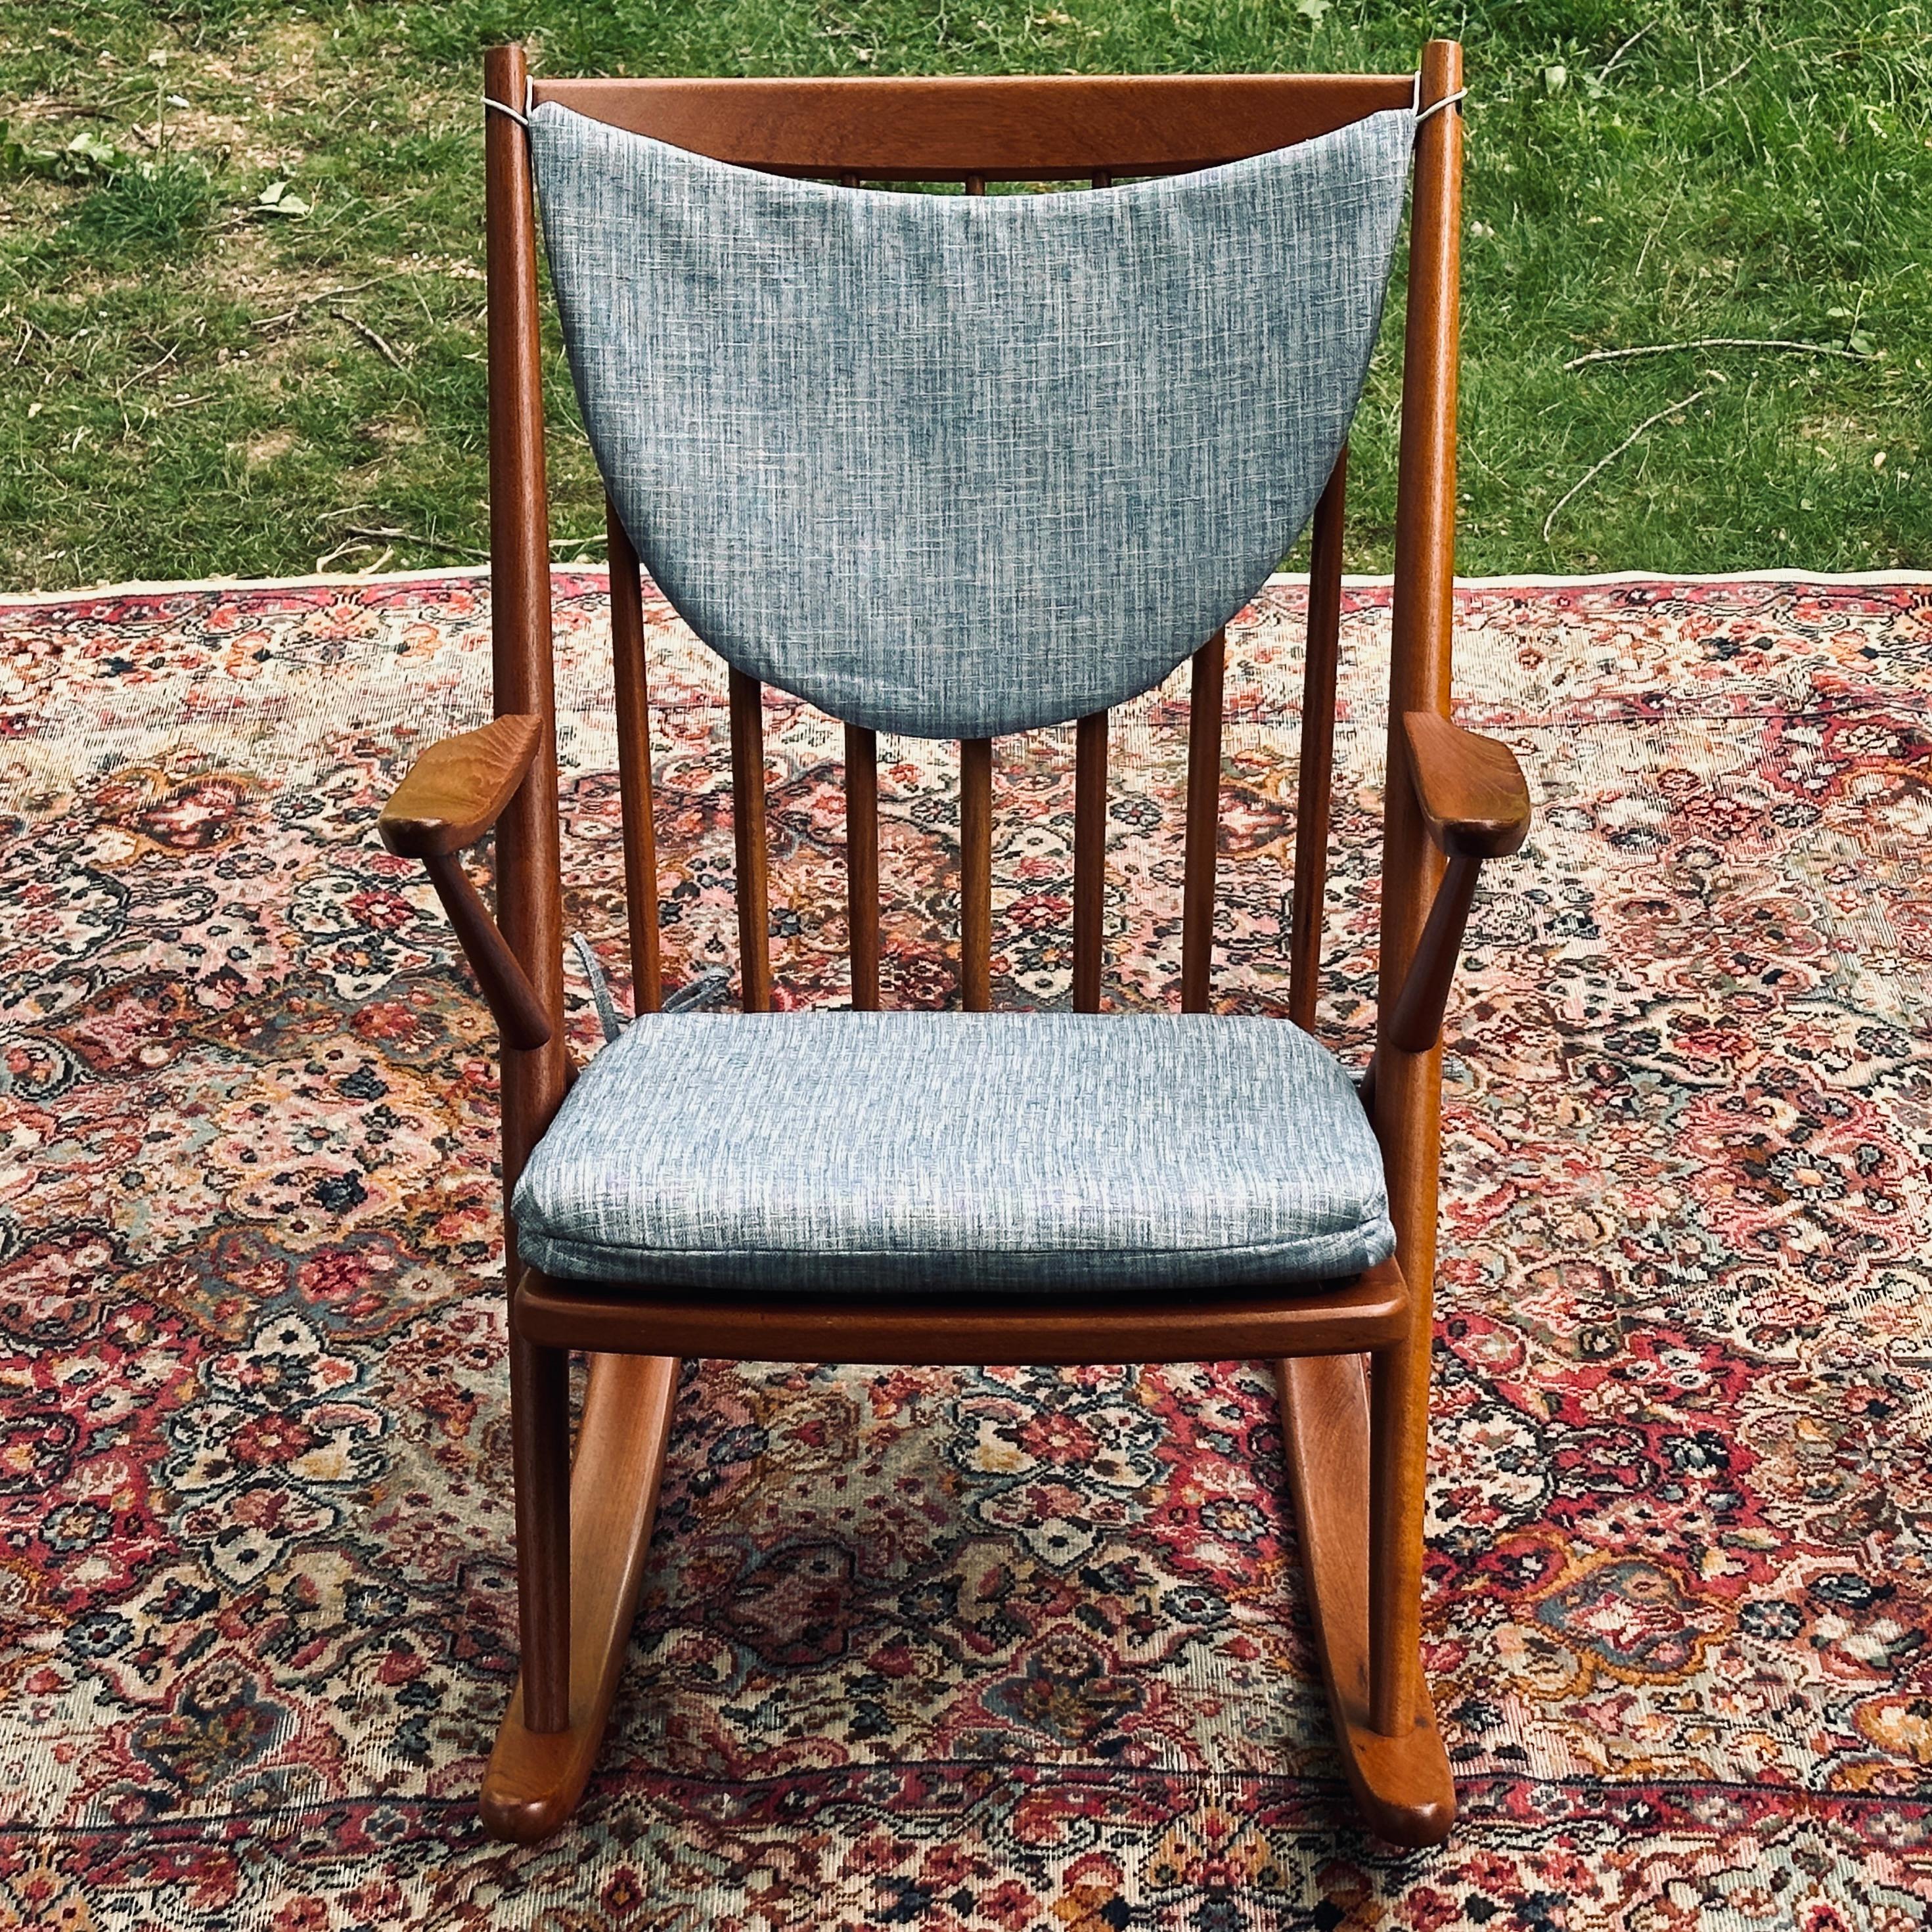 Danish modern solid teak rocker attributed to Frank Reeenskaug. Frame restored with a fresh teak oil finish and new webbing. Seat and back cushions brand new custom made by our expert upholsterers.  

DIMENSIONS
26.25ʺW × 31ʺD × 34ʺH
SEAT